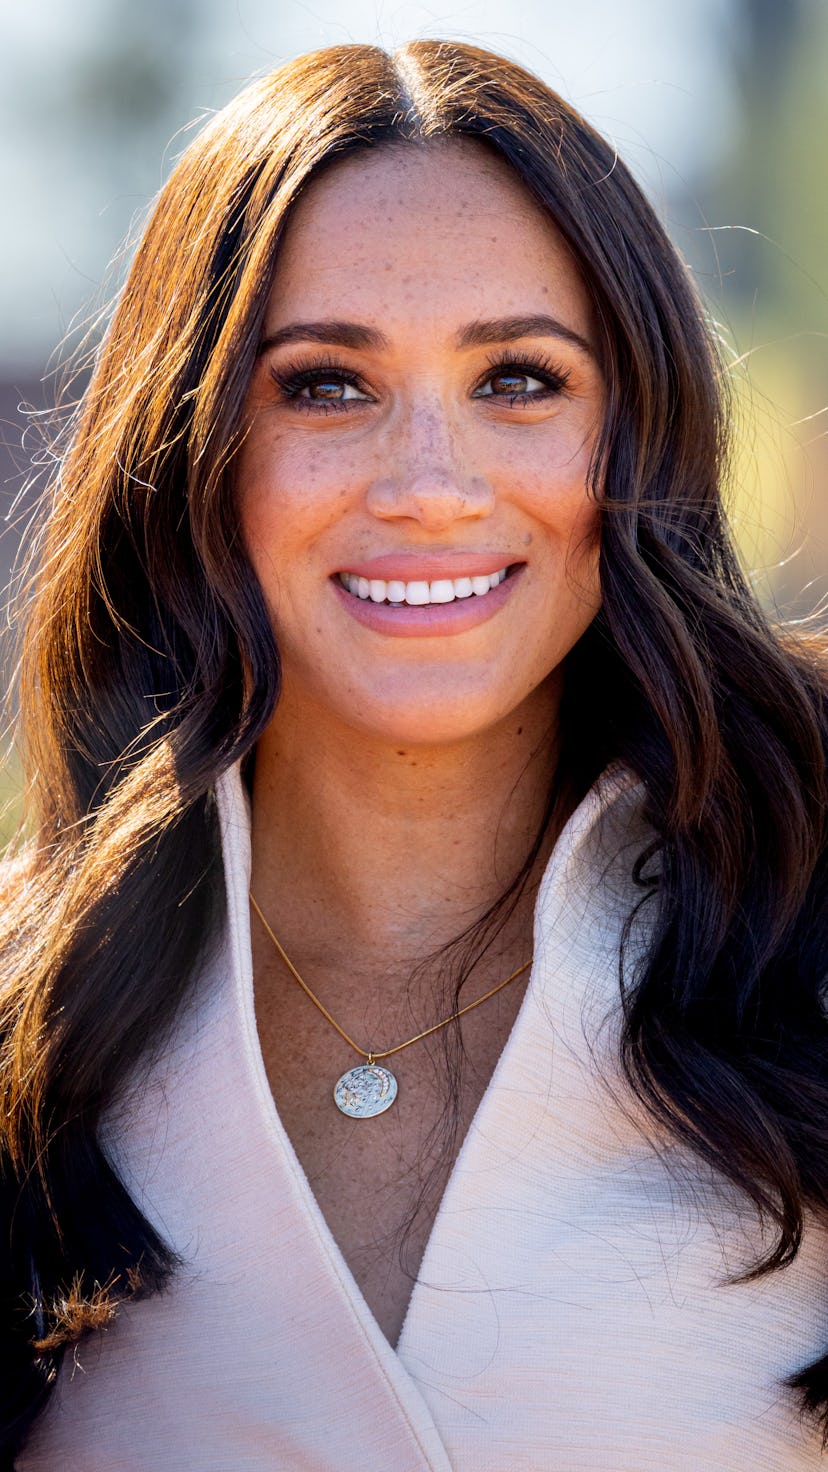 Megan Markle smiling with loose curls